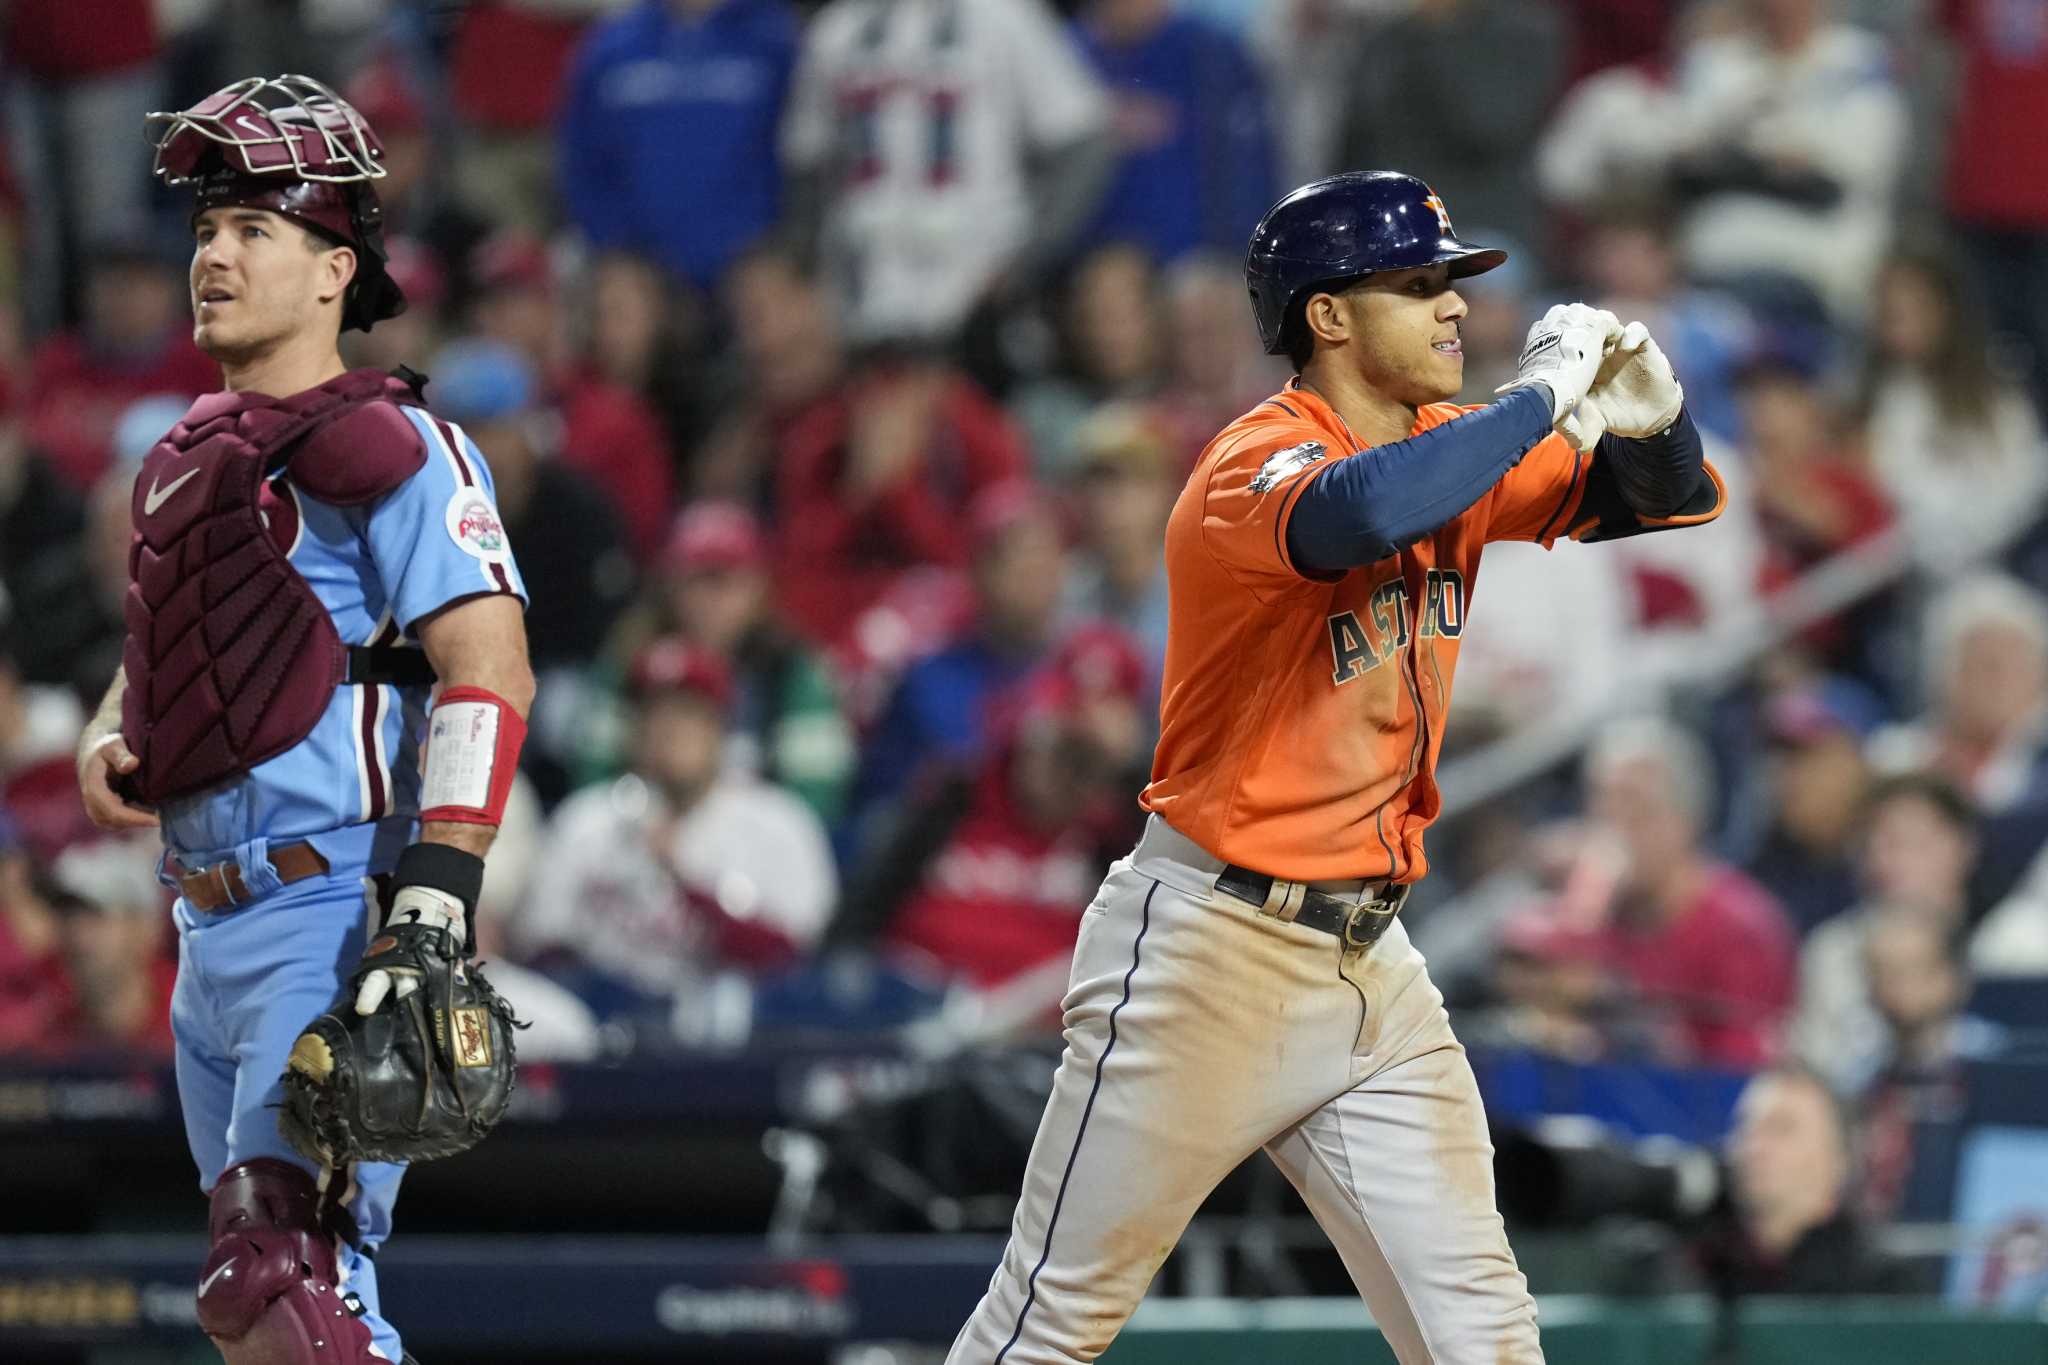 We Need to Talk About Jeremy Pena — The Astros' New Shortstop Just